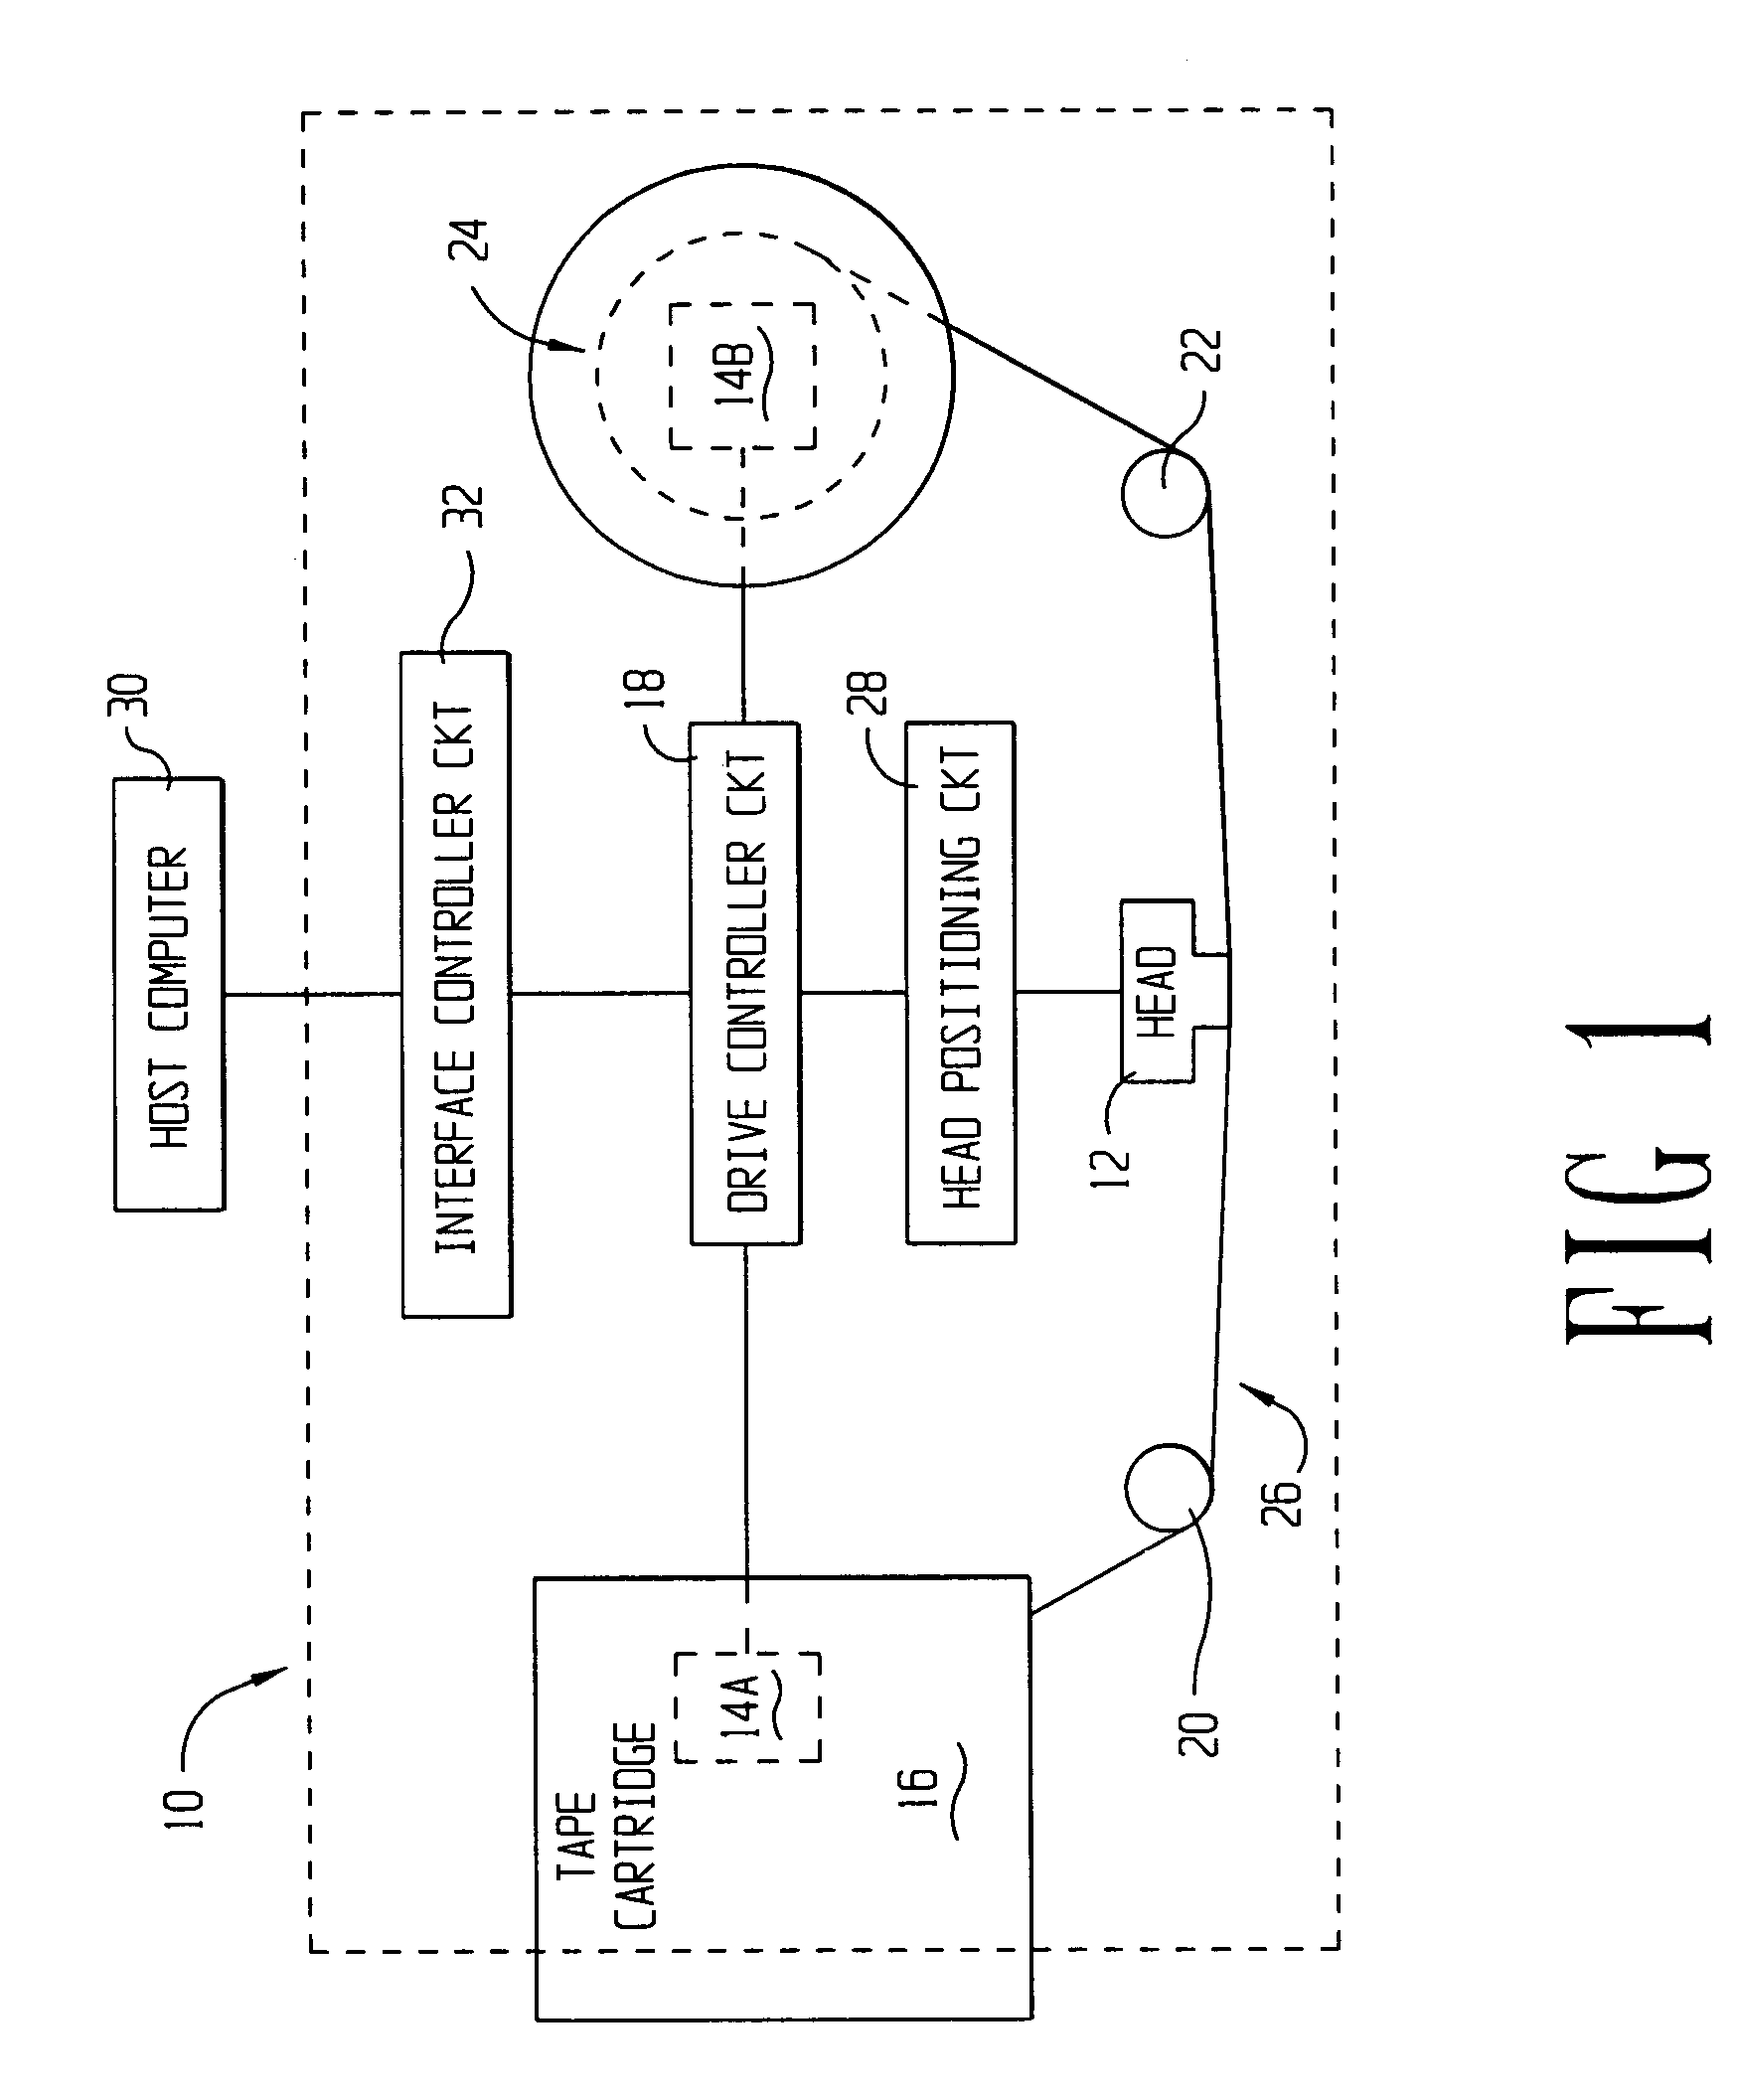 Method and system of a head for a storage media